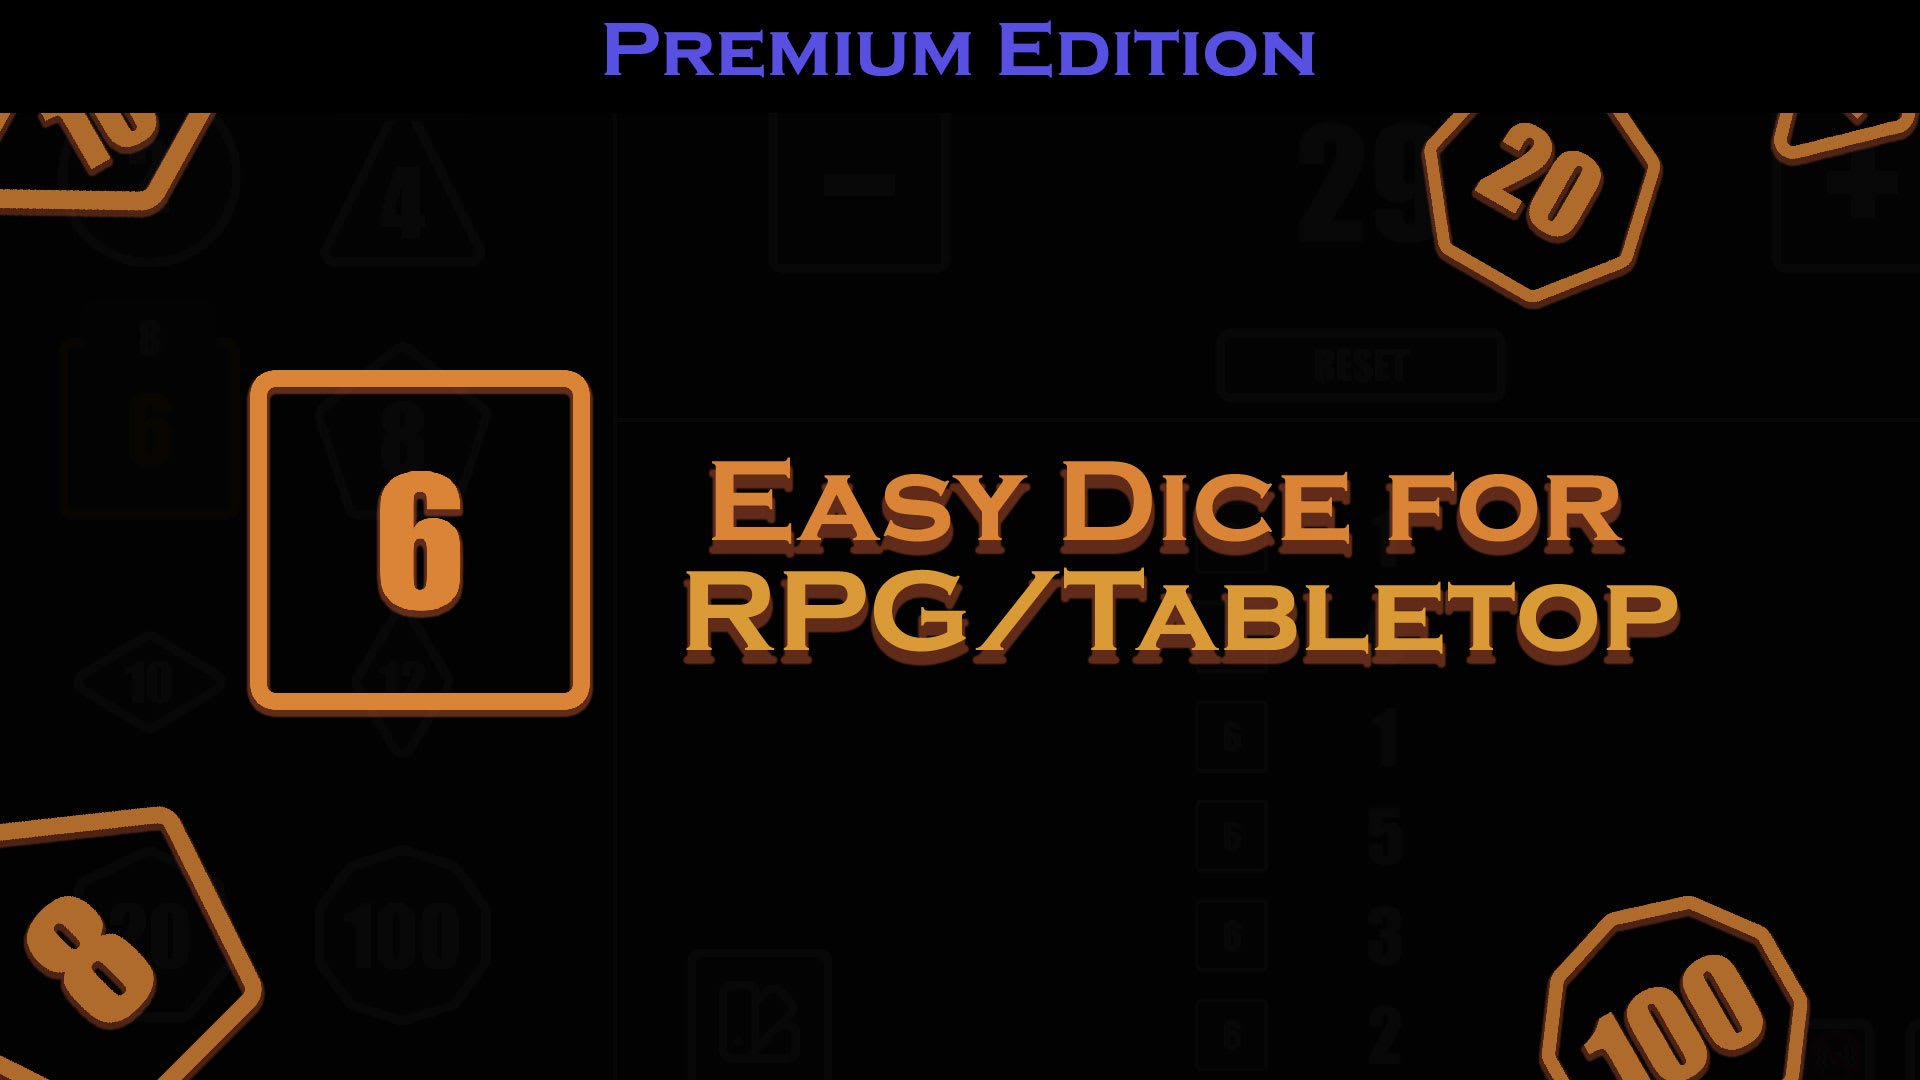 Easy Dice for RPG/Tabletop - Premium Edition